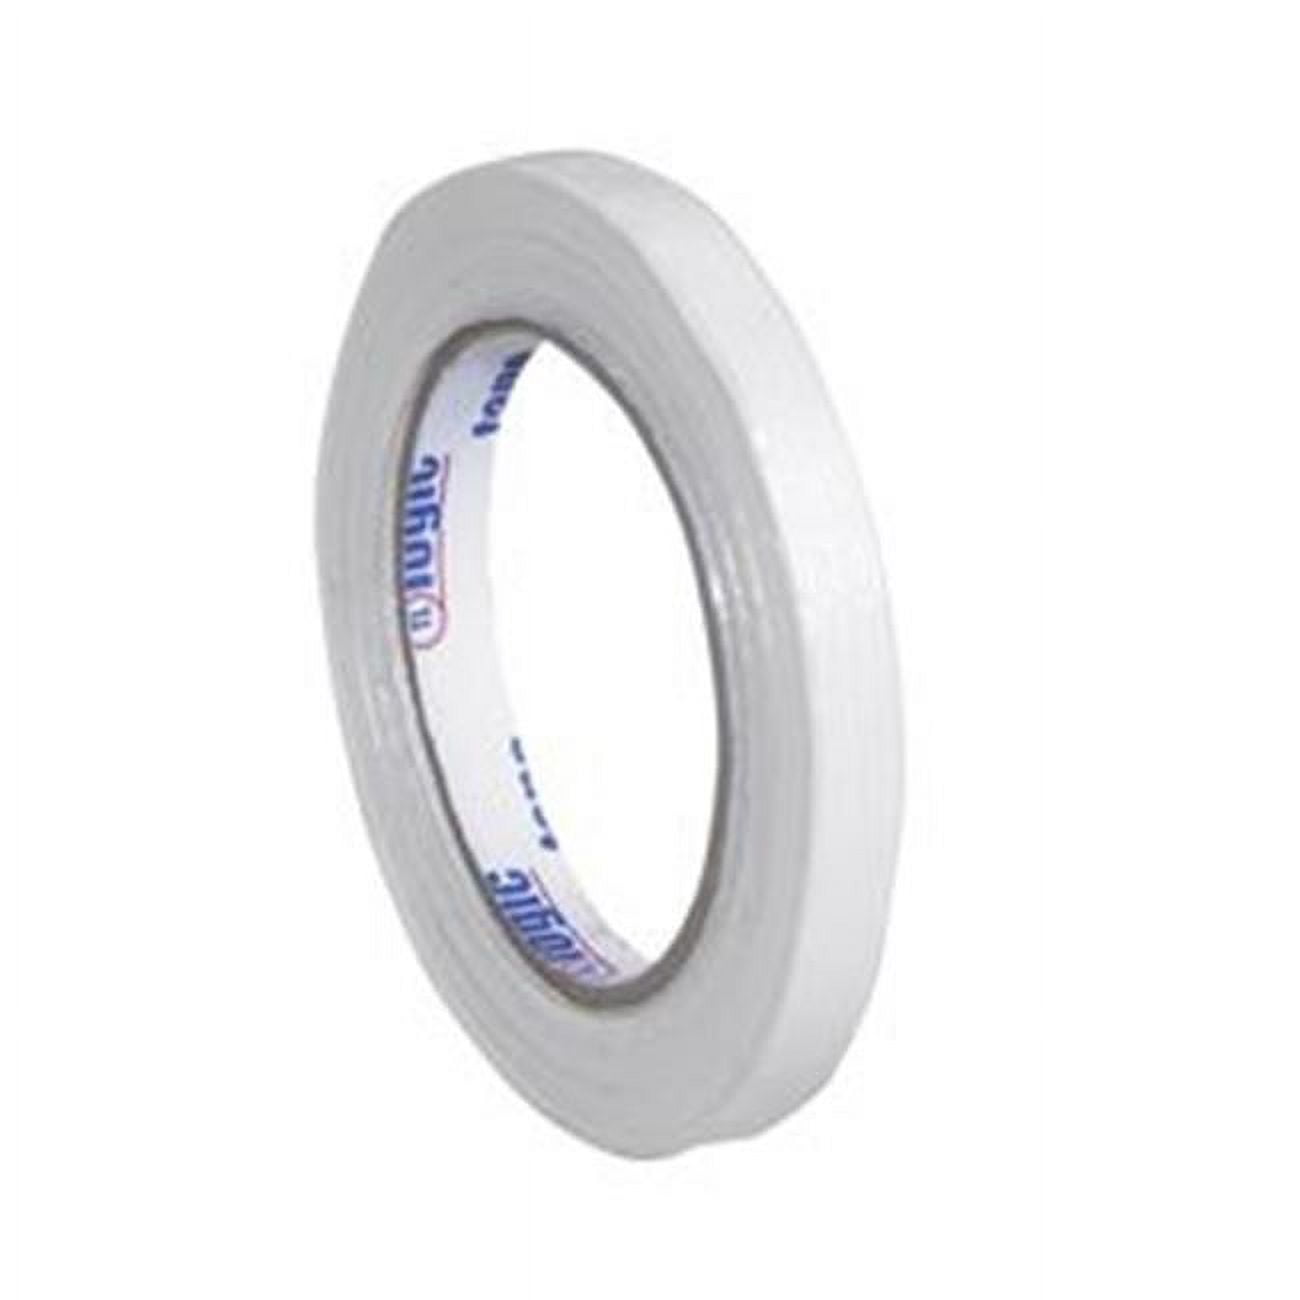 Tape Logic T9131300 0.50 In. X 60 Yards 1300 Strapping Tape, Clear - Case Of 72